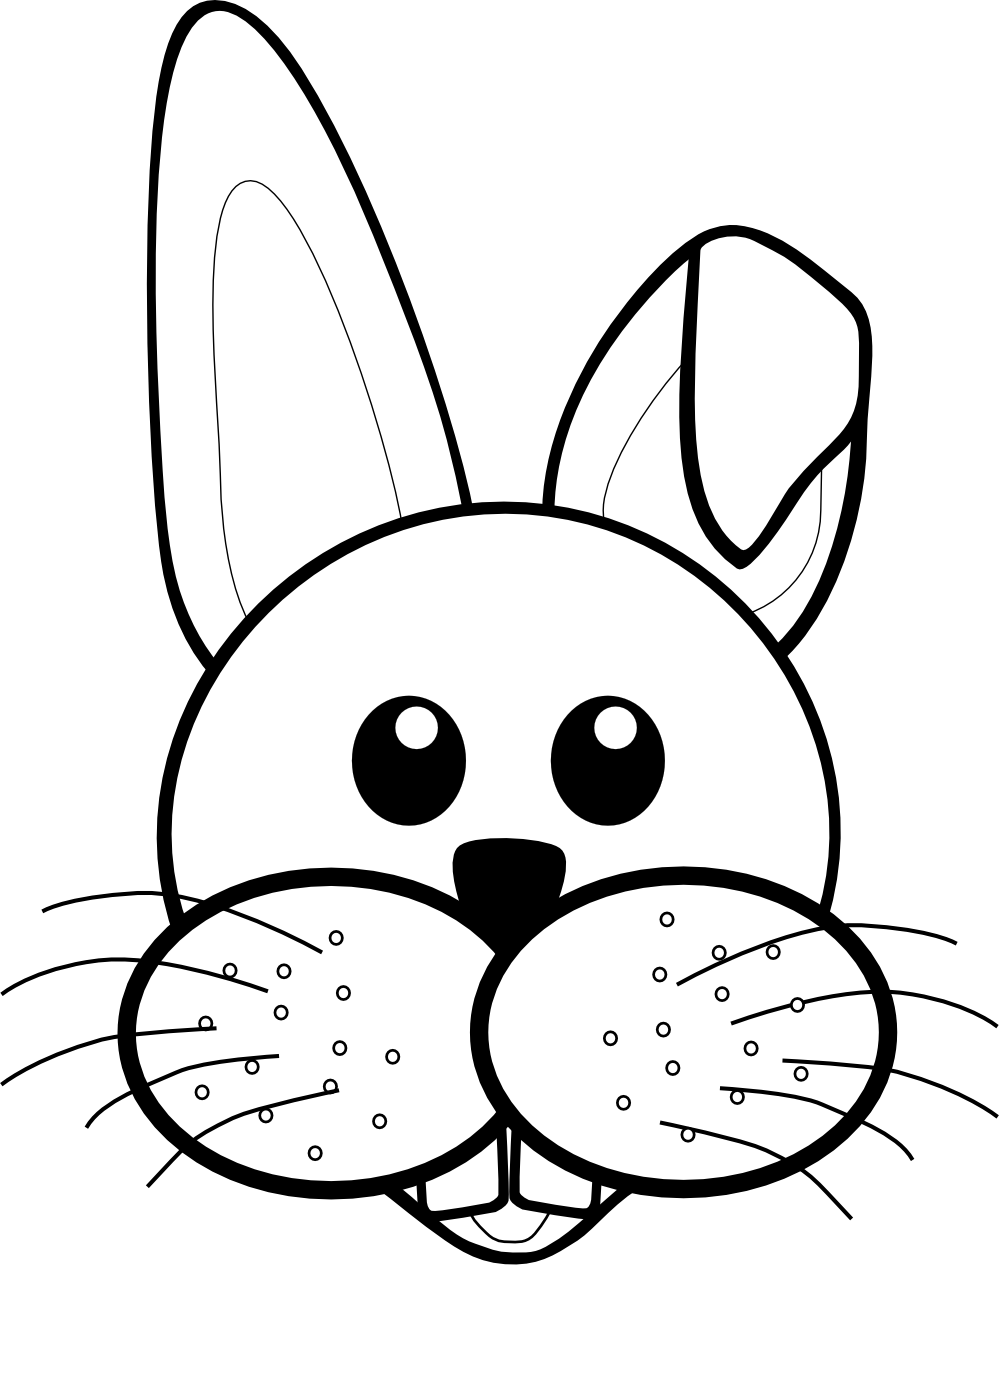 Bunny Head Outline Svg - 234+ File for Free